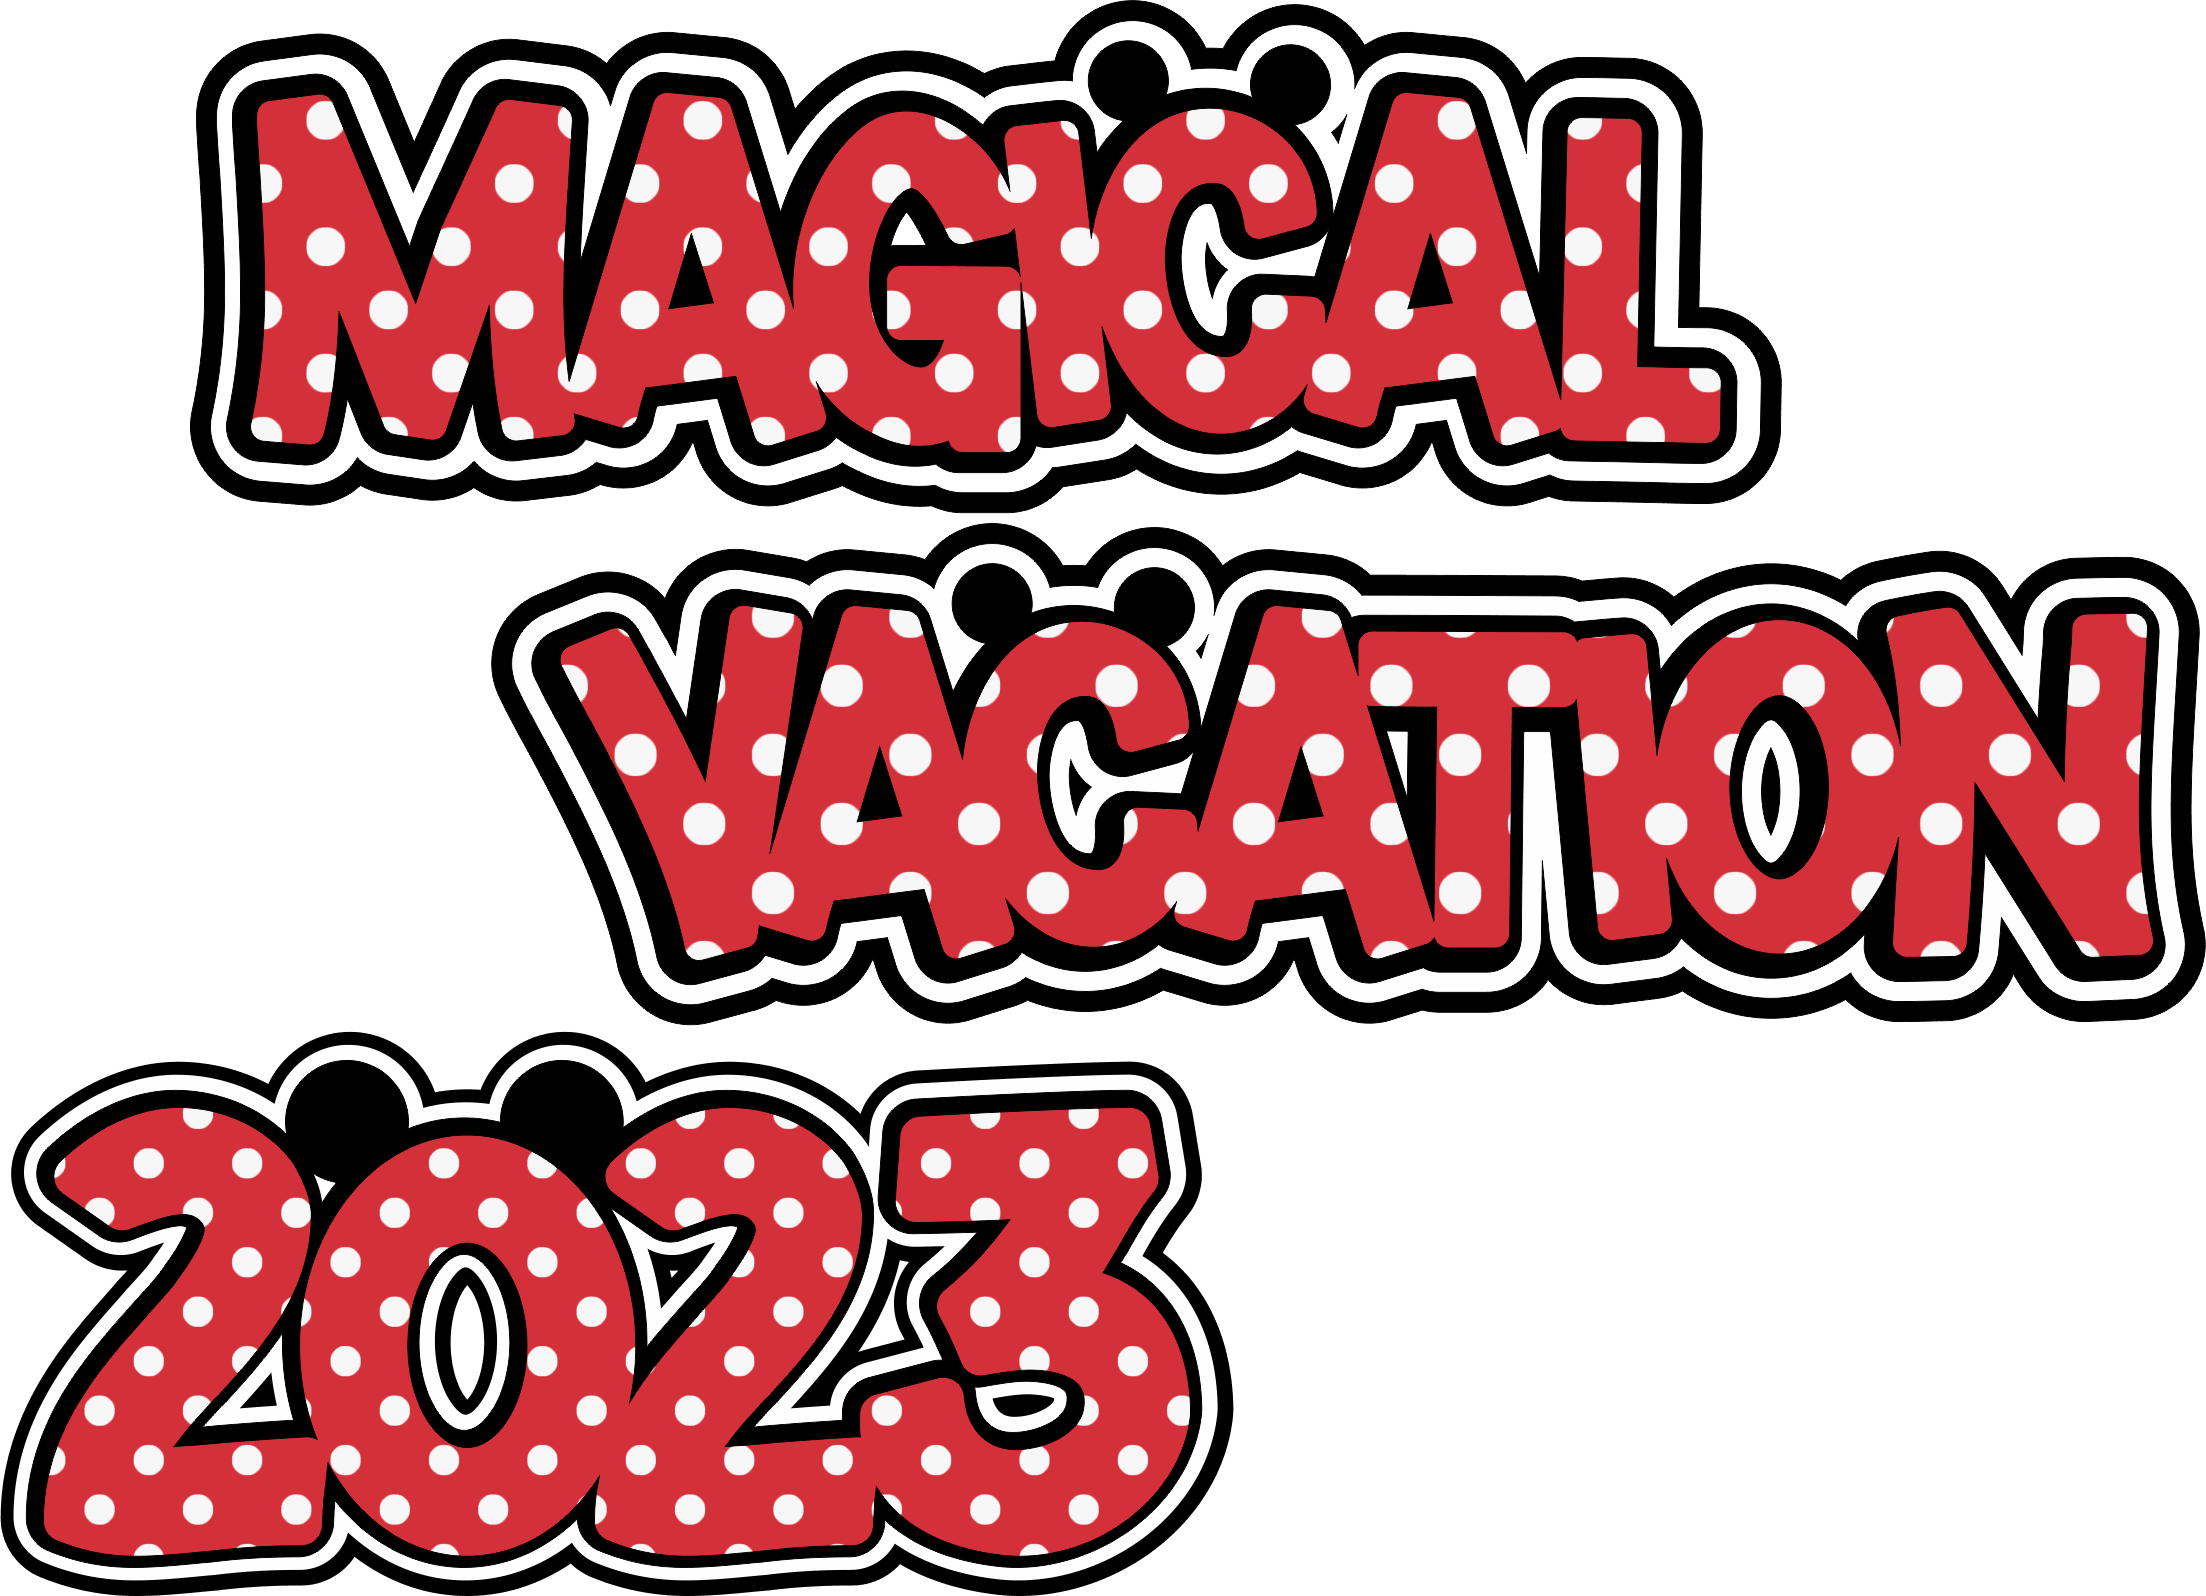 Disneyana Collection 2023 Magical Vacation Scrapbook Embellishment by SSC Designs